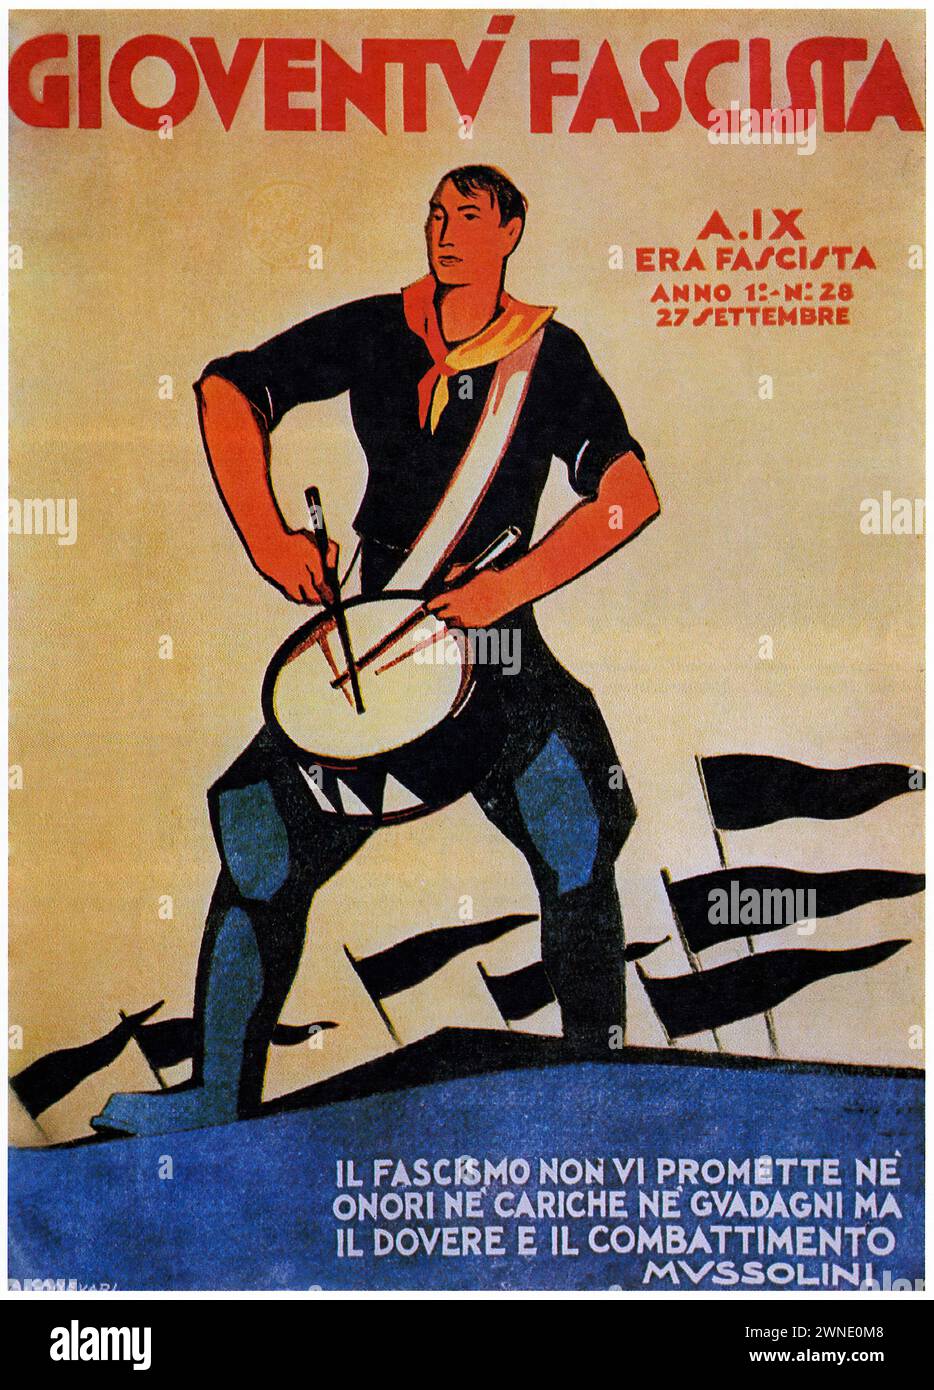 'GIOVENTÙ FASCISTA A.IX ERA FASCISTA ANNO 1°: N°28 27/SETTEMBRE IL FASCISMO NON VI PROMETTE NE ONORI NE CARICHE NE GUADAGNI MA IL DOVERE E IL COMBATTIMENTO MUSSOLINI' ['FASCIST YOUTH YEAR IX FASCIST ERA YEAR 1: NO. 28 SEPTEMBER 27 FASCISM DOES NOT PROMISE YOU HONORS OR POSITIONS OR GAINS BUT DUTY AND FIGHT MUSSOLINI'] Vintage Italian Advertising featuring a young man in a black shirt playing a drum, with Fascist symbols and flags in the background. The poster uses a stark, heroic style typical of the Fascist propaganda of the era. Stock Photo